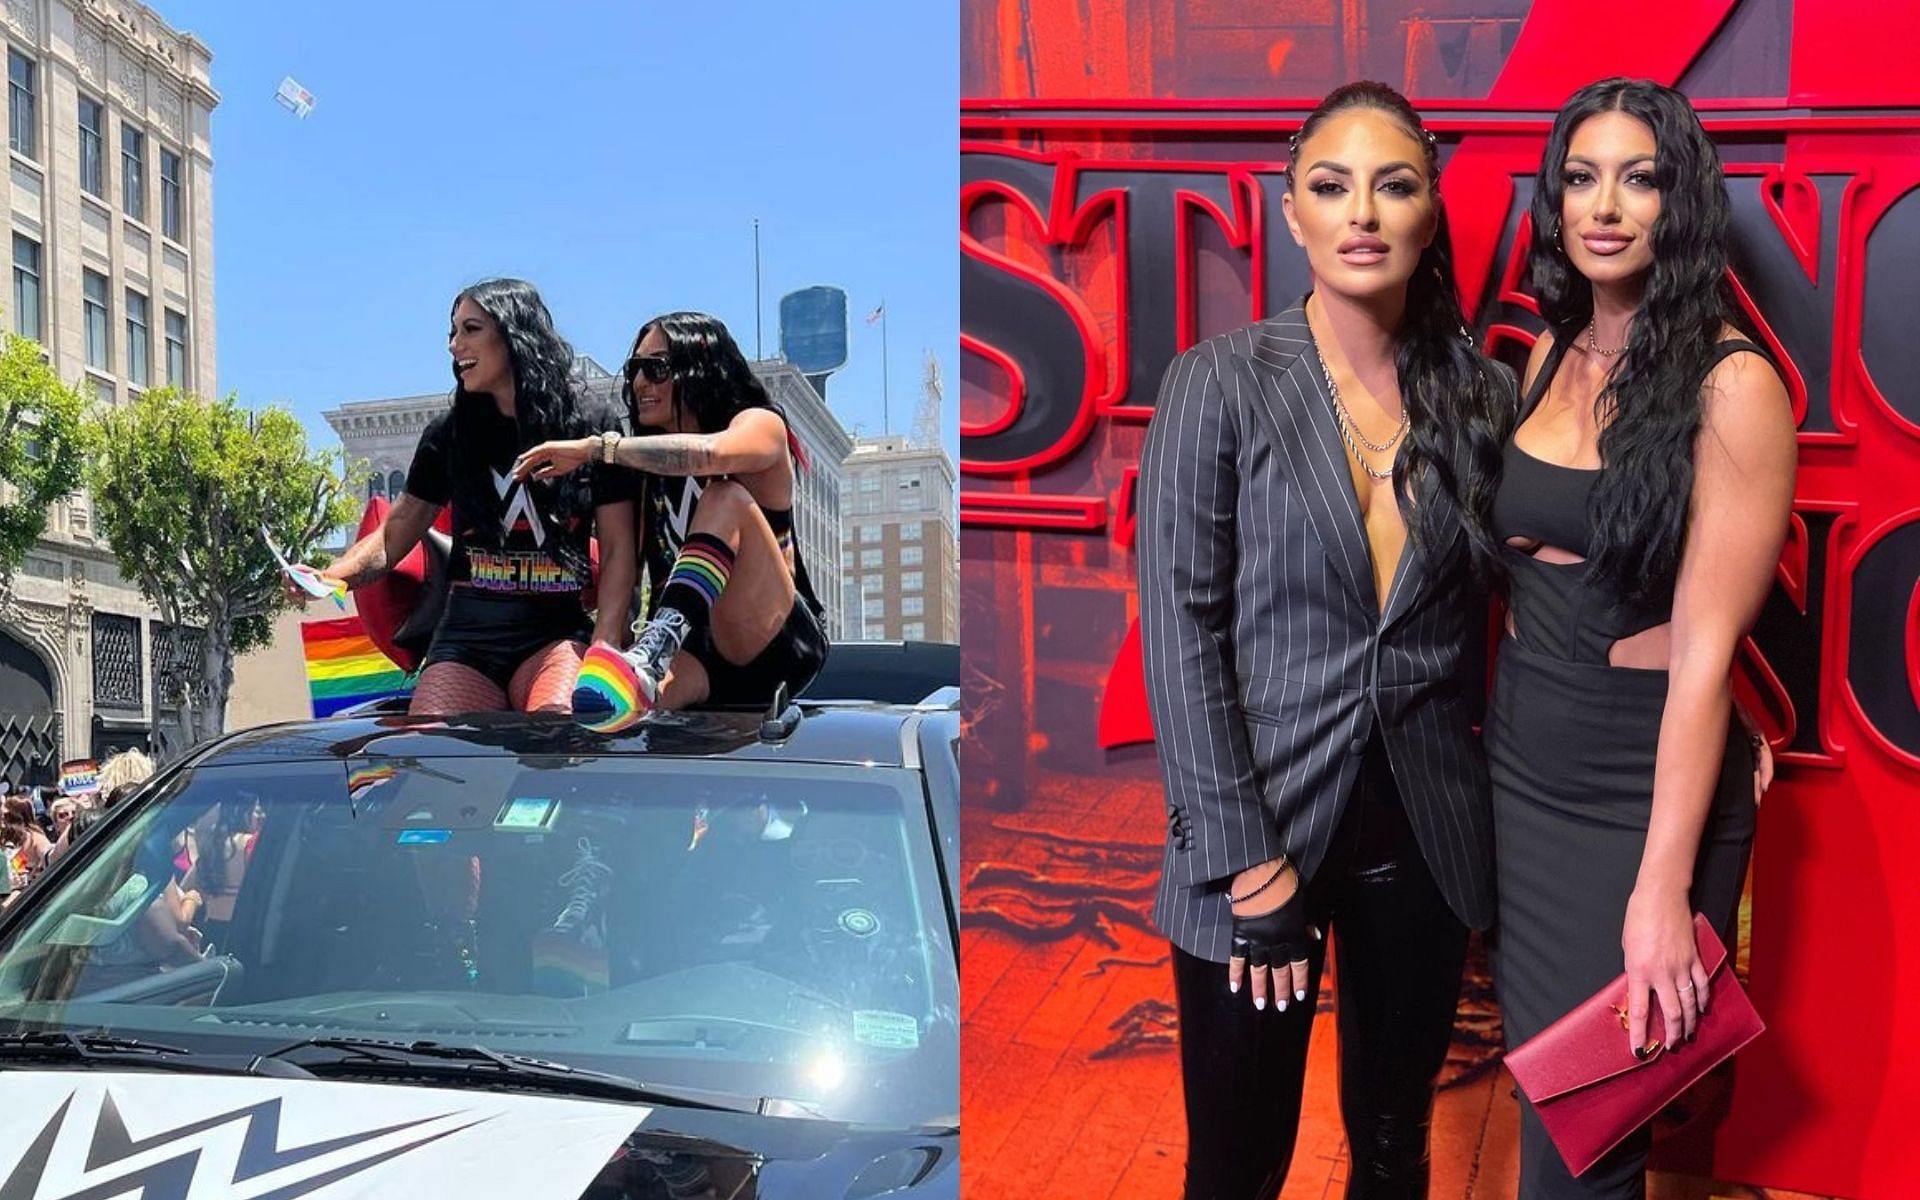 Sonya Deville has been public about her relationship on all social media platforms